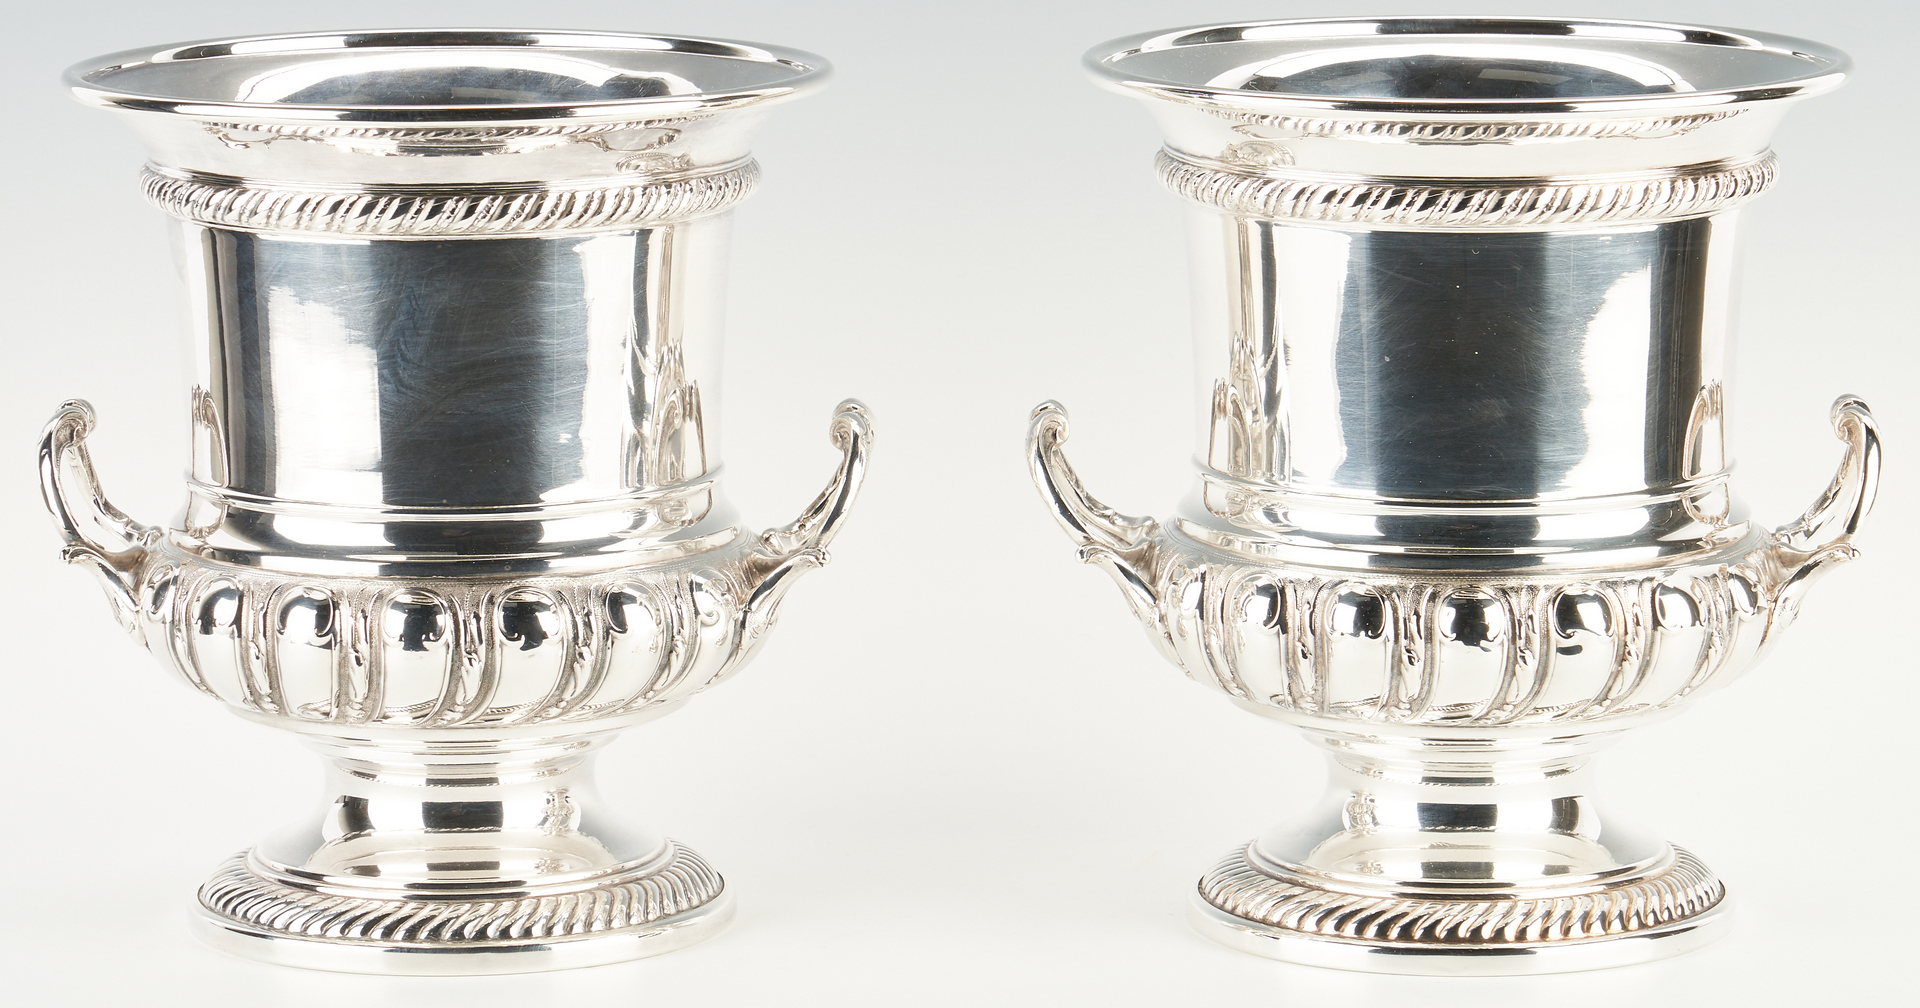 Lot 922: Pair of Regency Style Silver Plated Wine Coolers